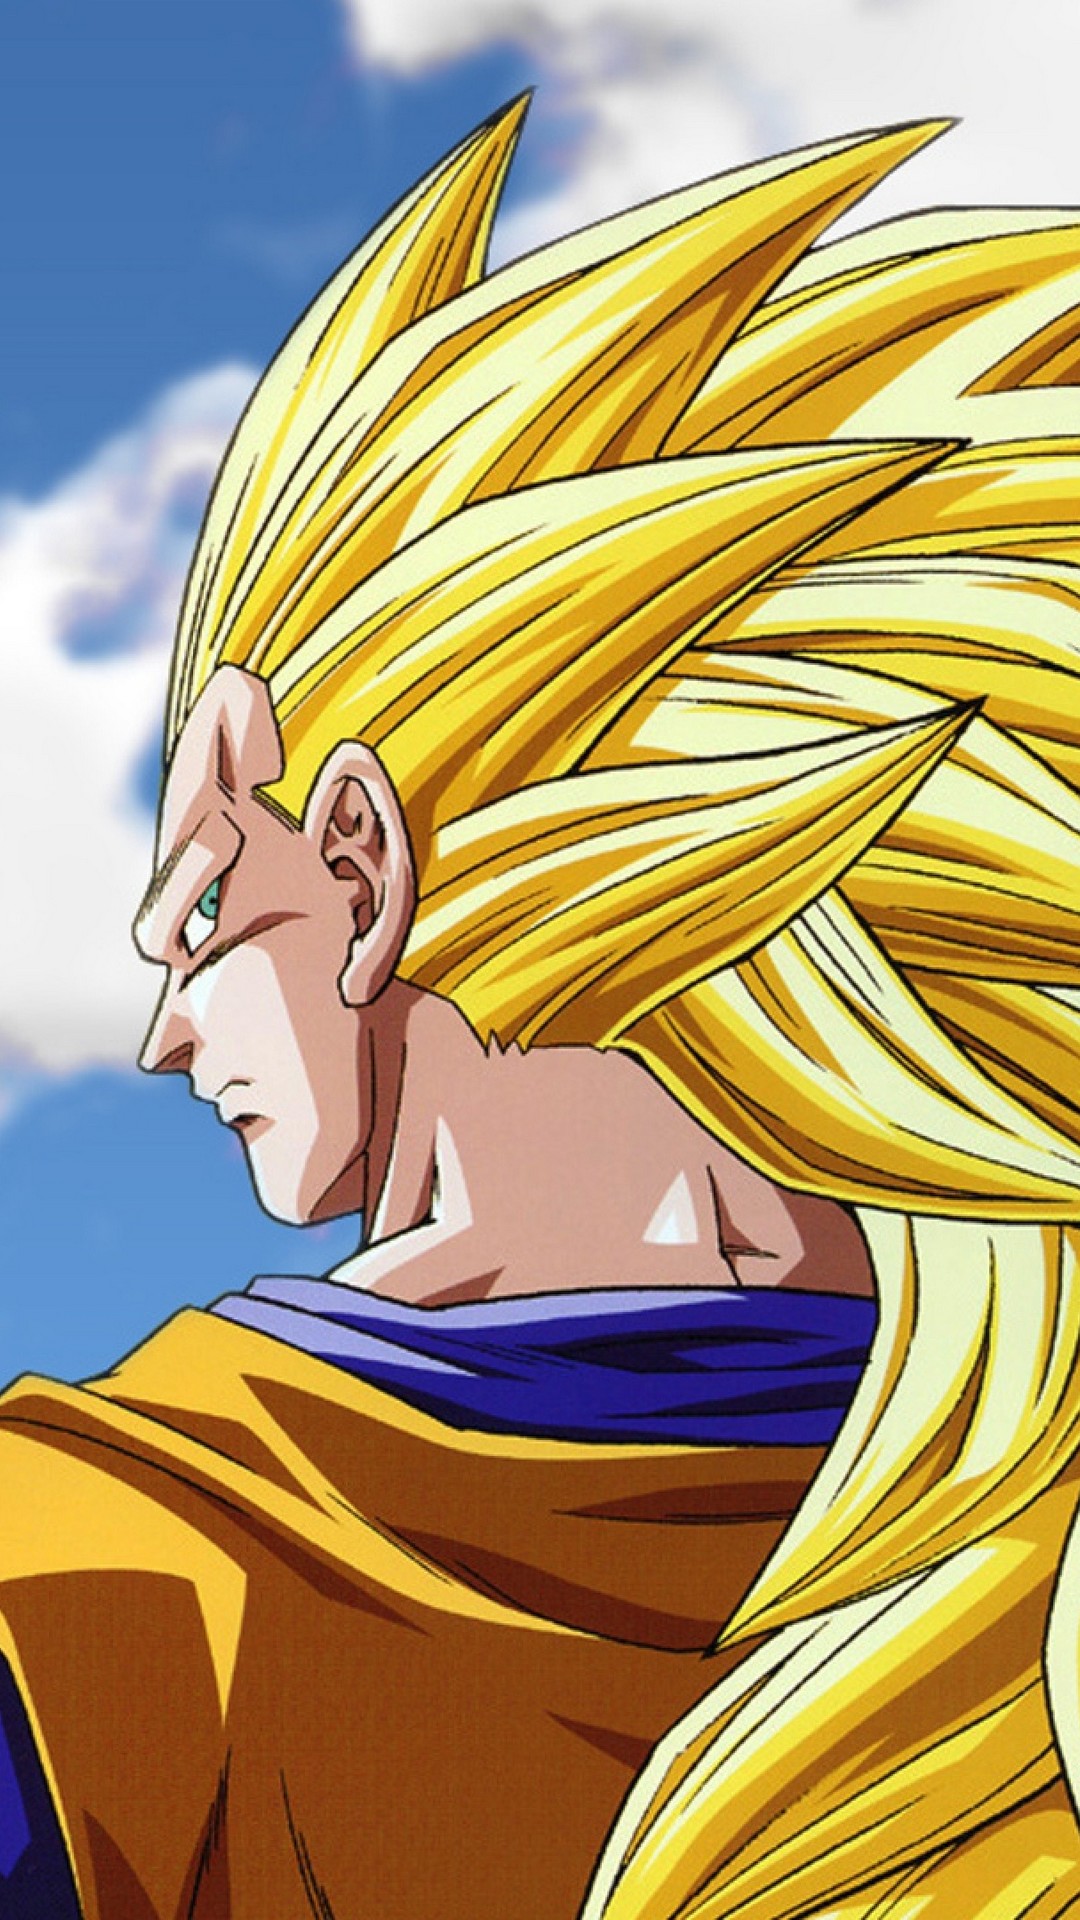 Goku SSJ3 Wallpaper Android with HD resolution 1080x1920